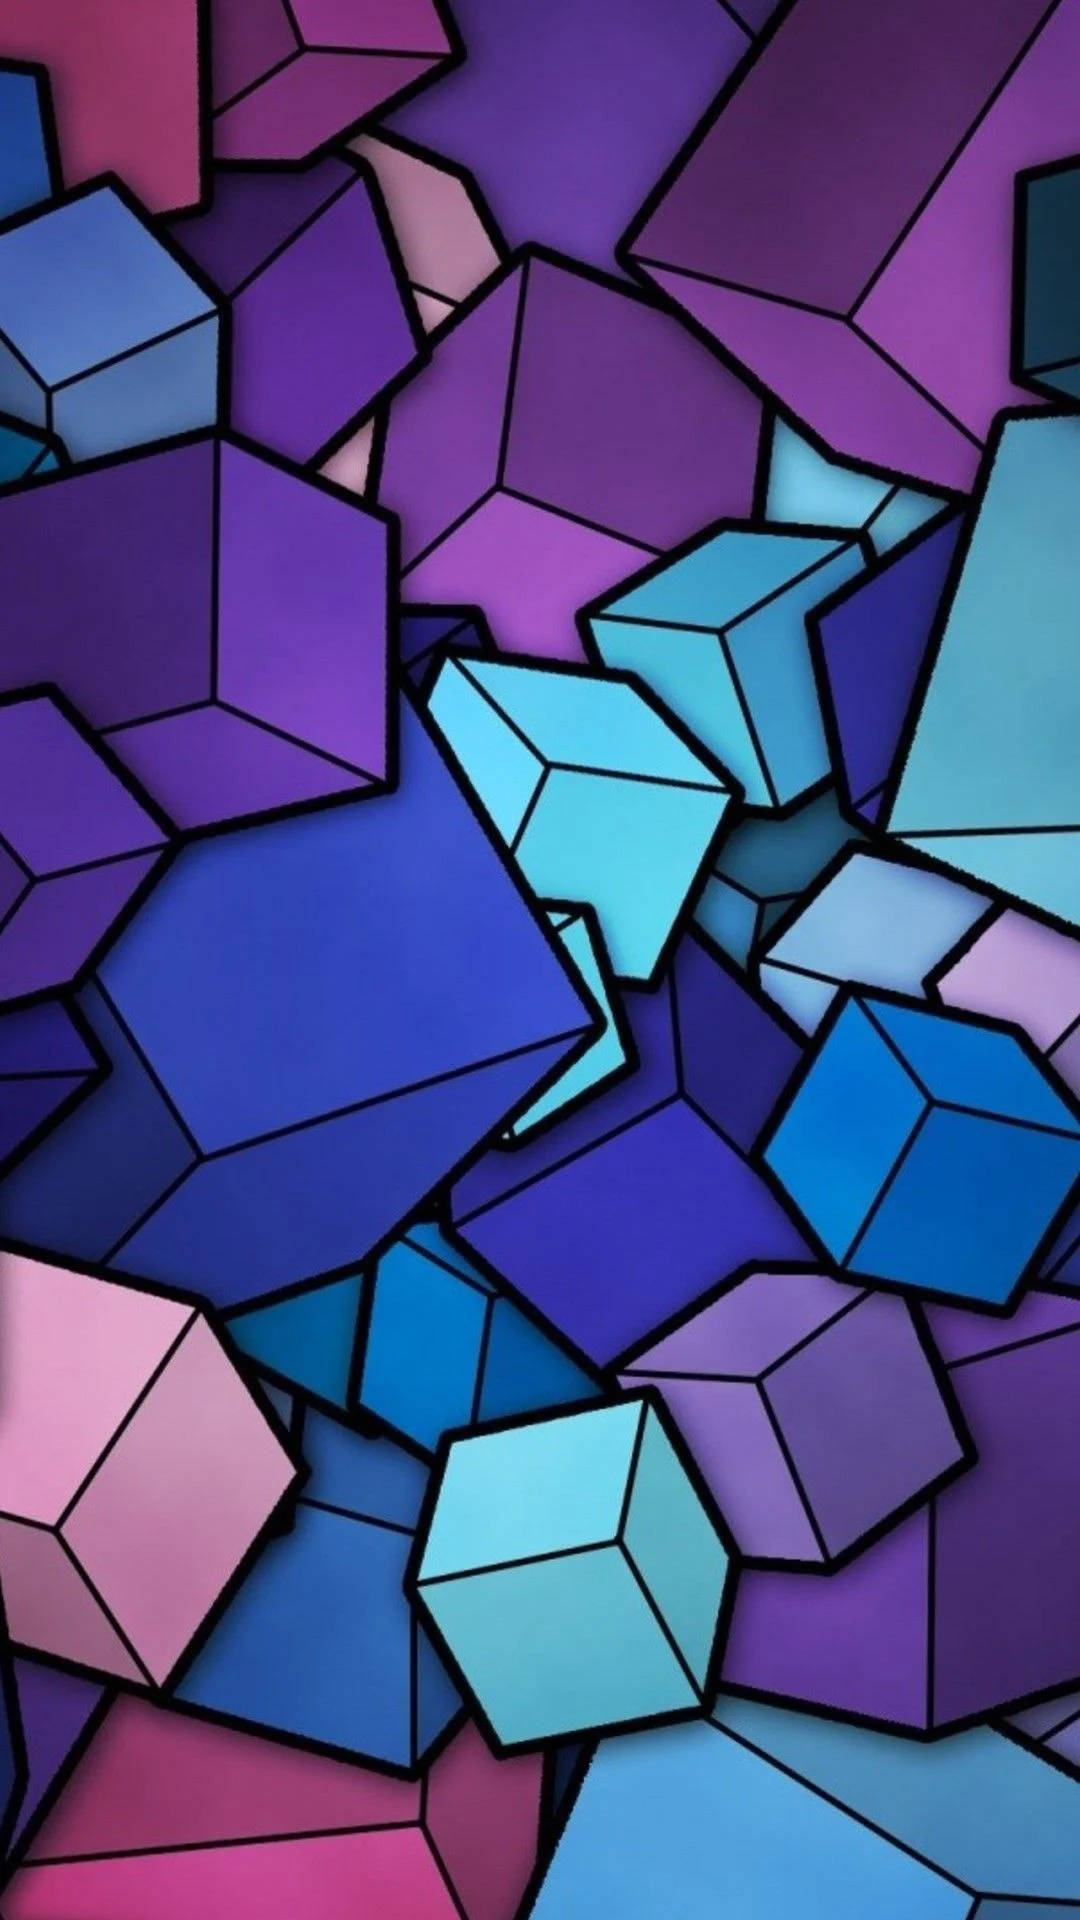 3d Cubes Abstract Iphone Wallpaper